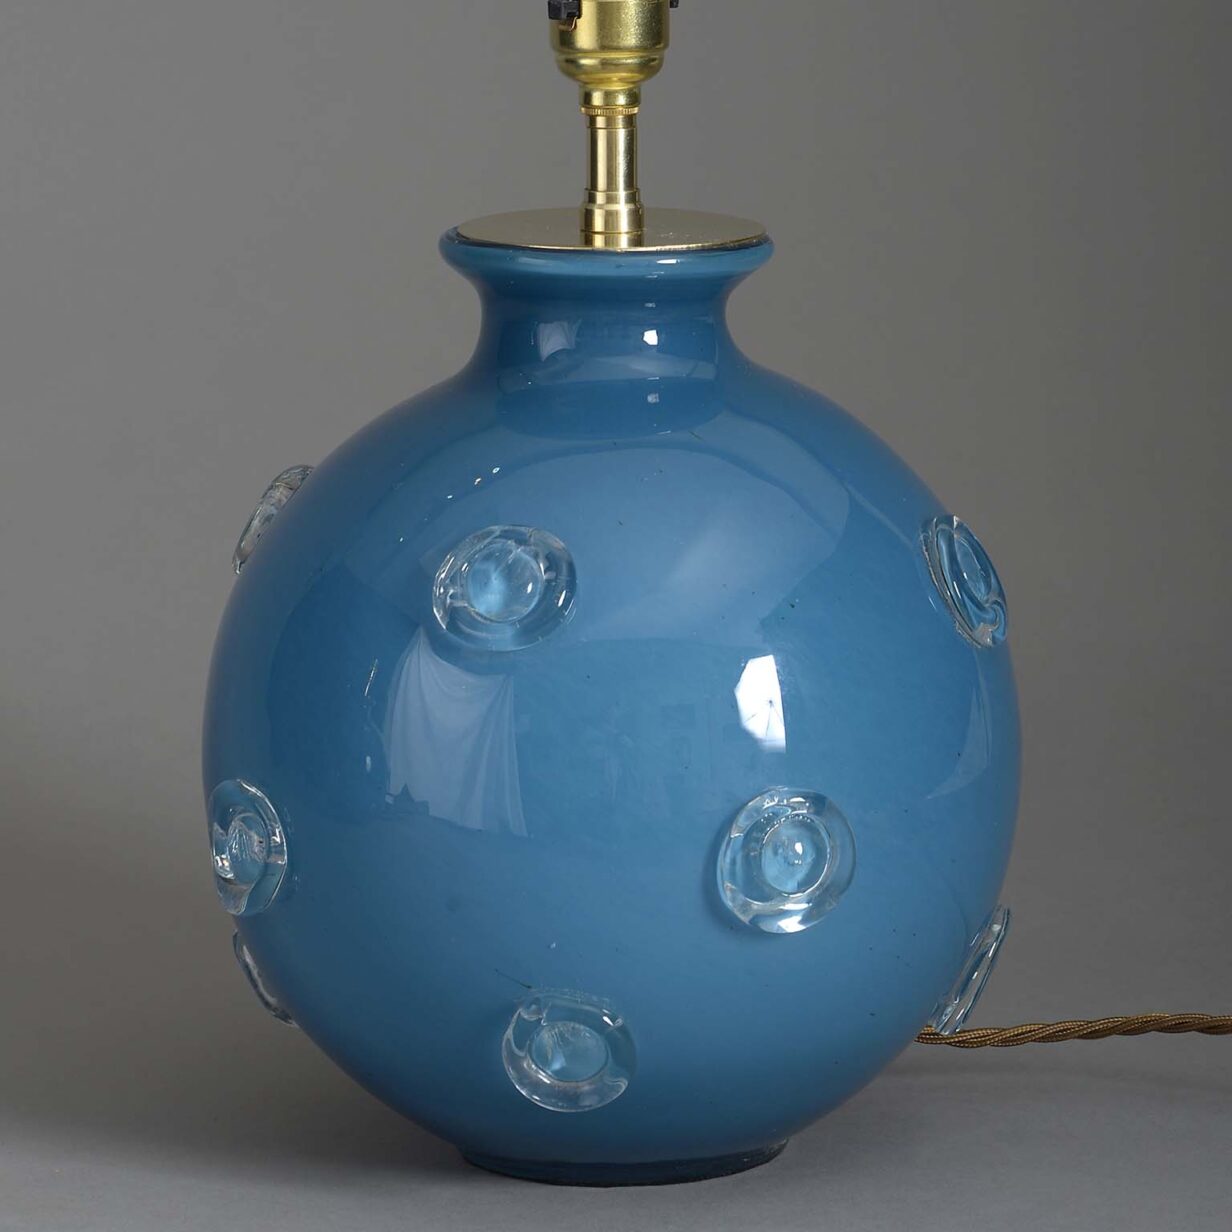 Pair of mid-century blue glass spherical lamps